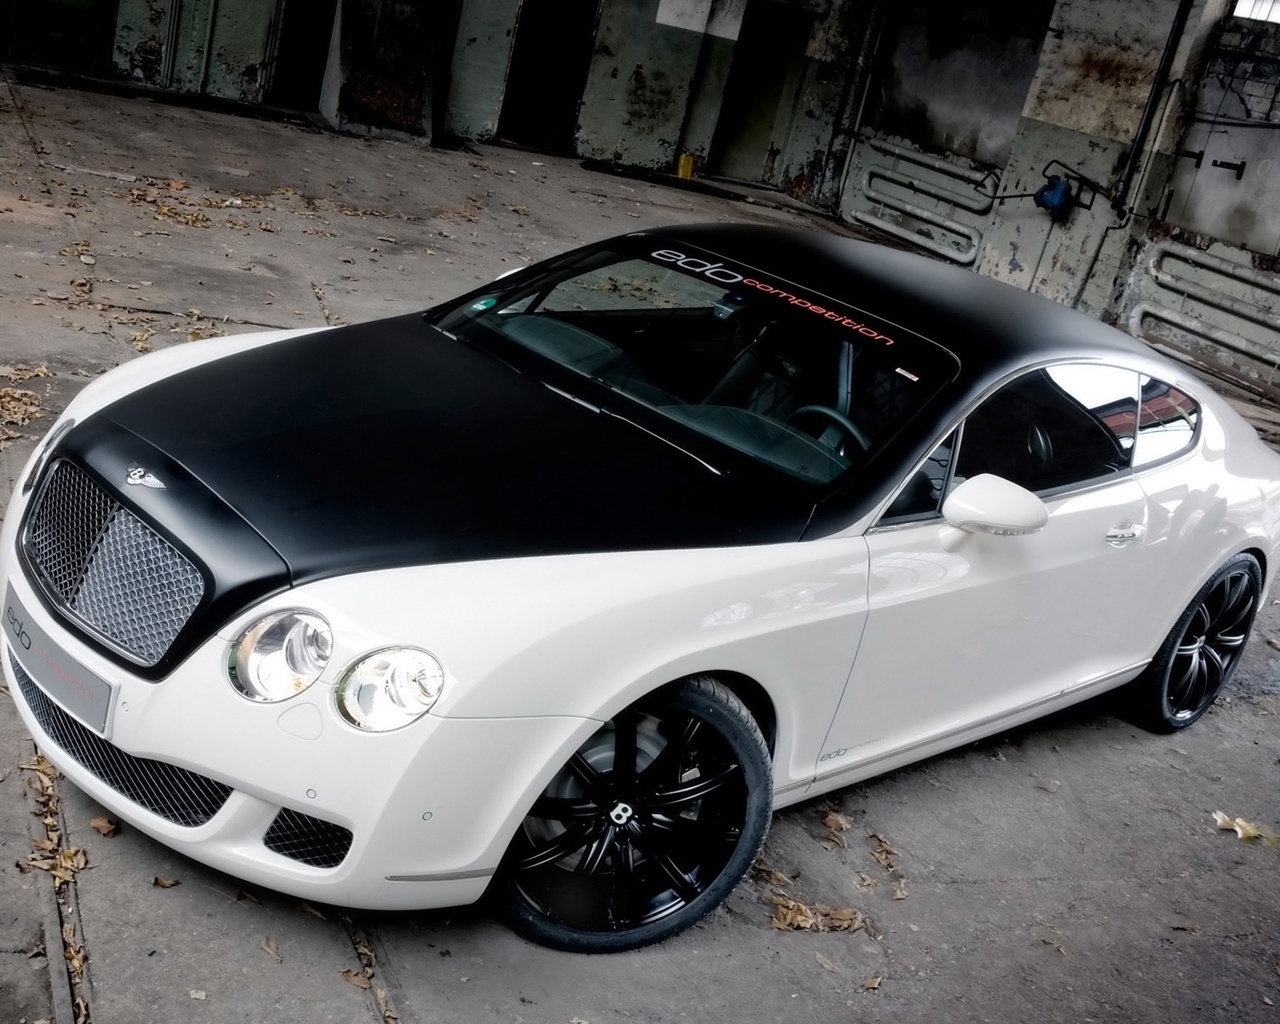 Bentley GT 2009 Edo Competition for 1280 x 1024 resolution